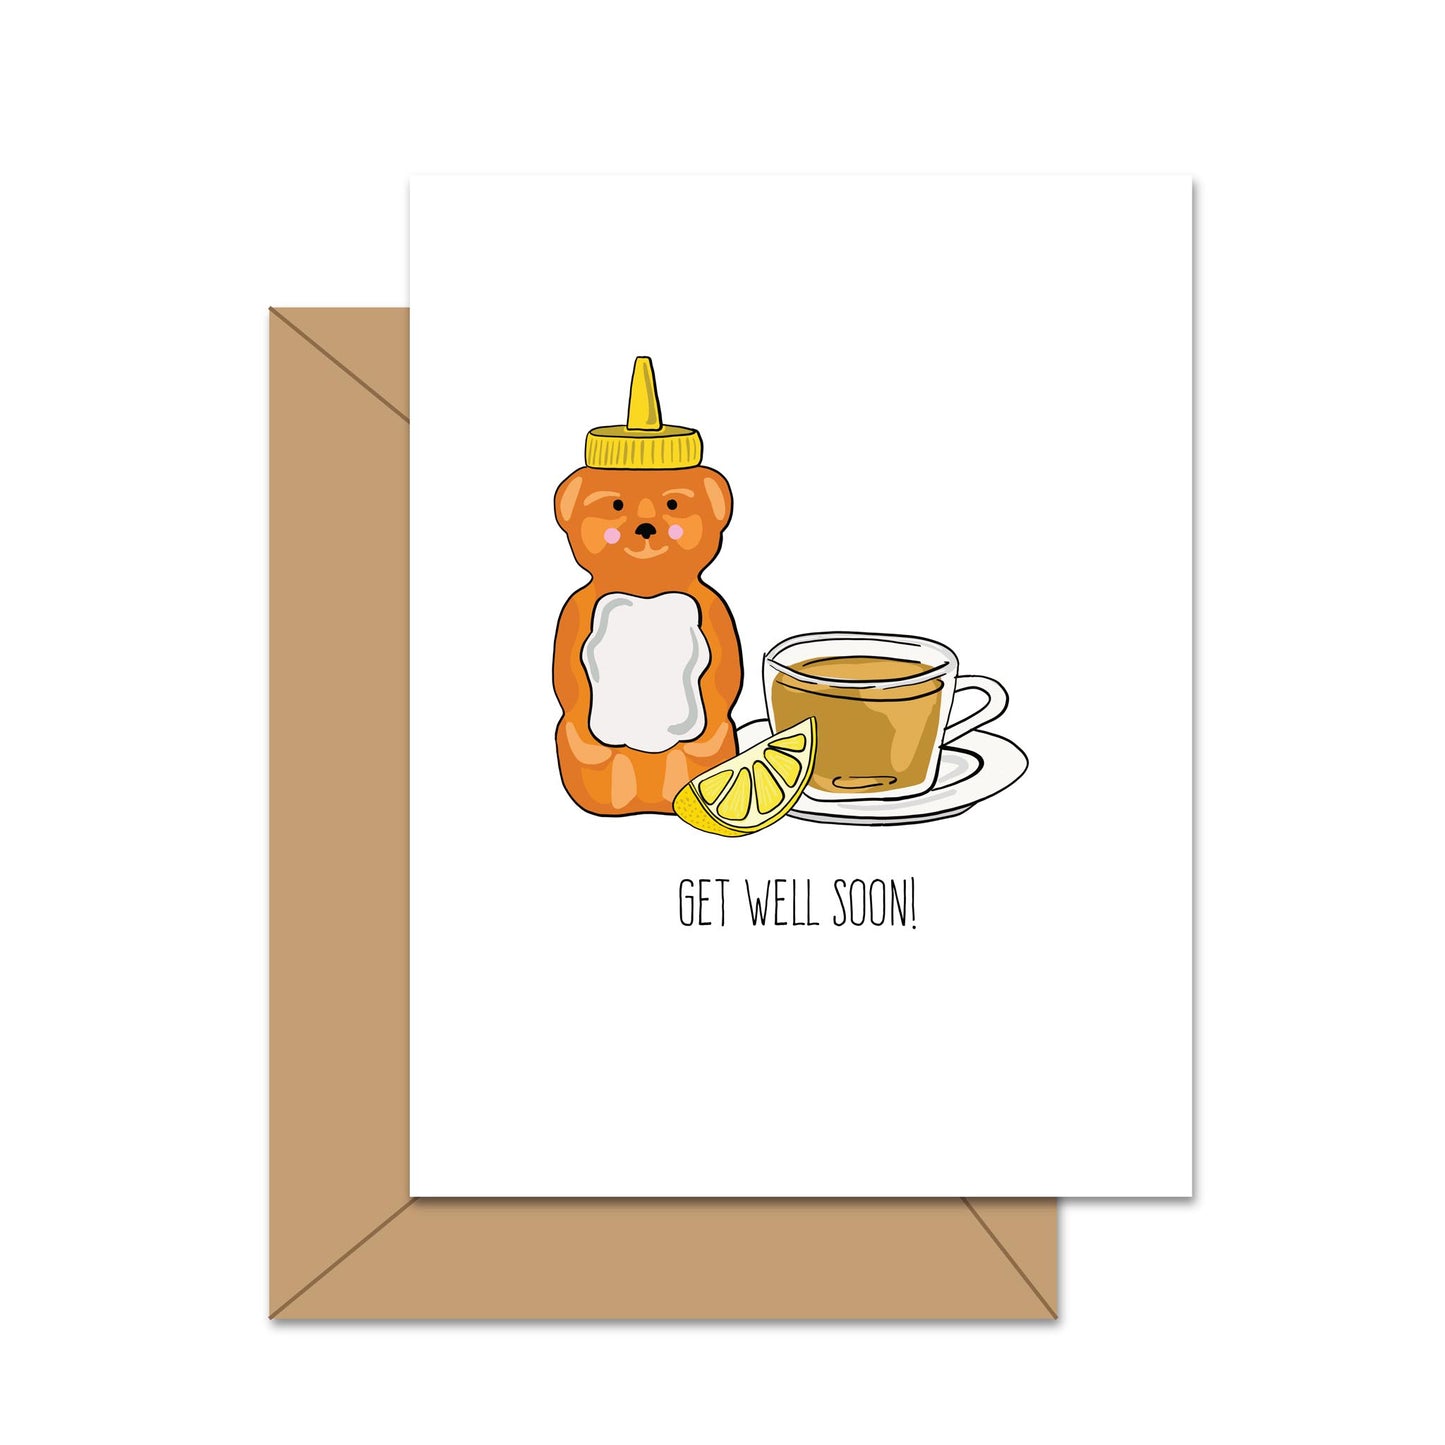 Get Well Soon - Greeting Card